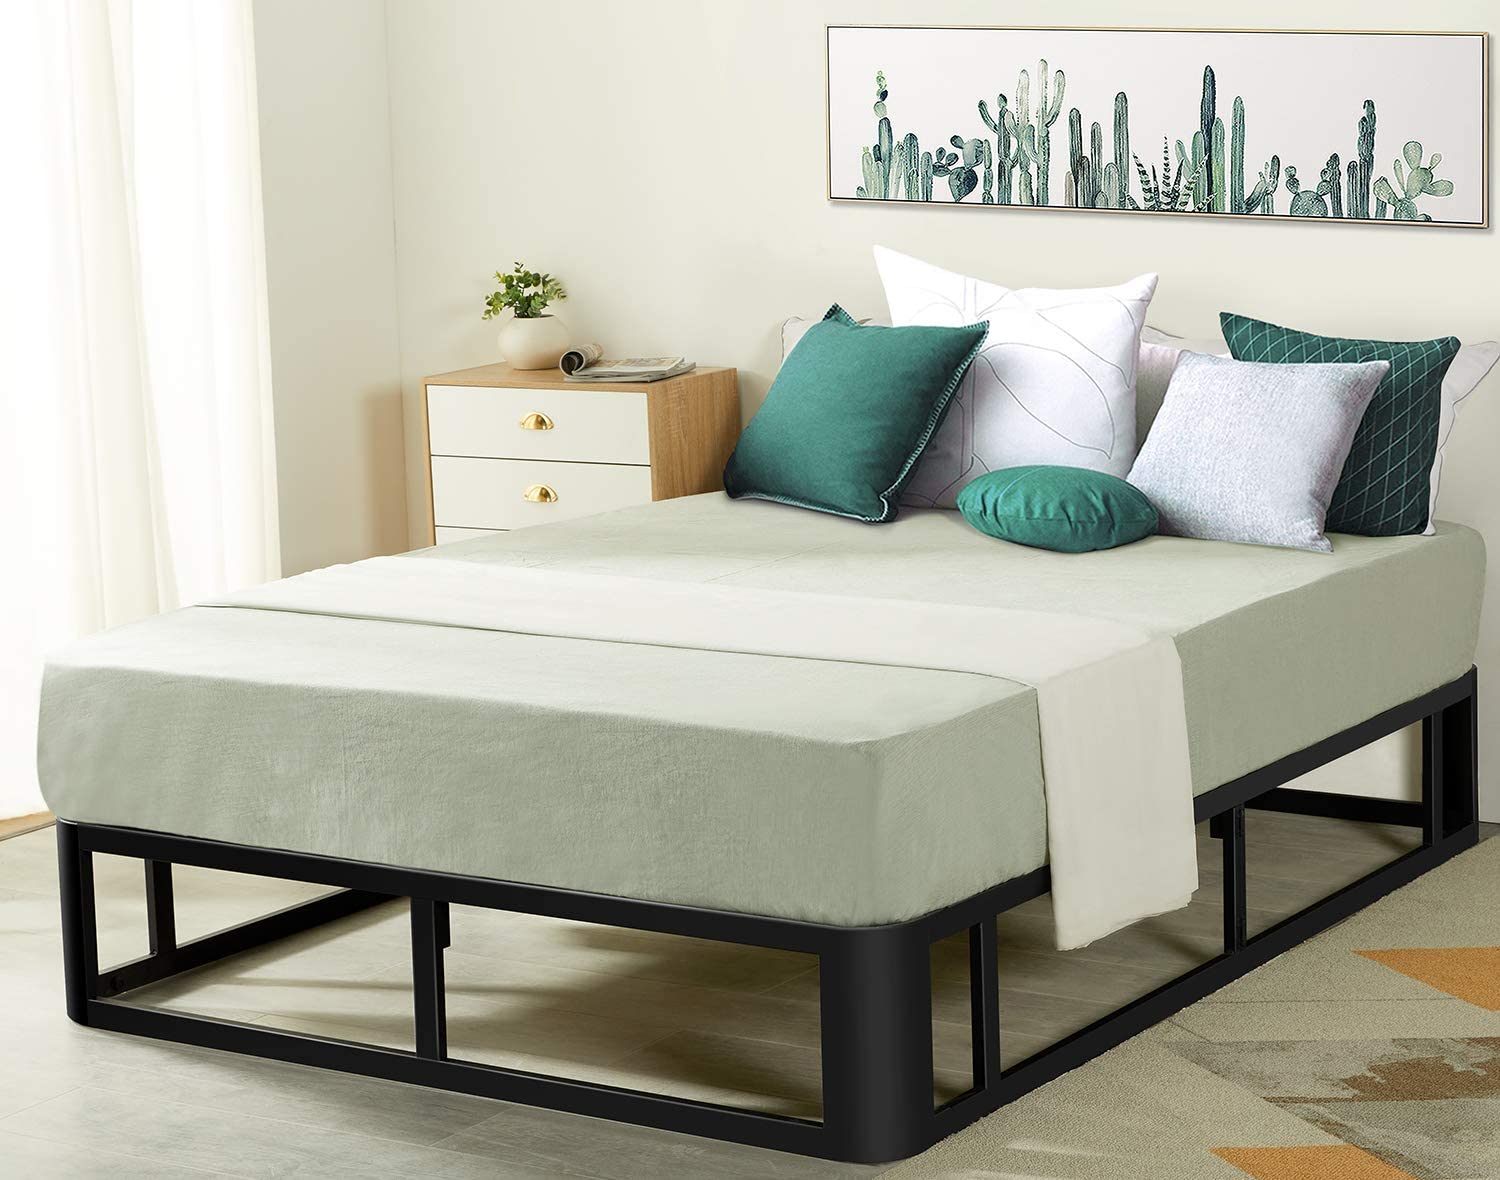 single beds that join together